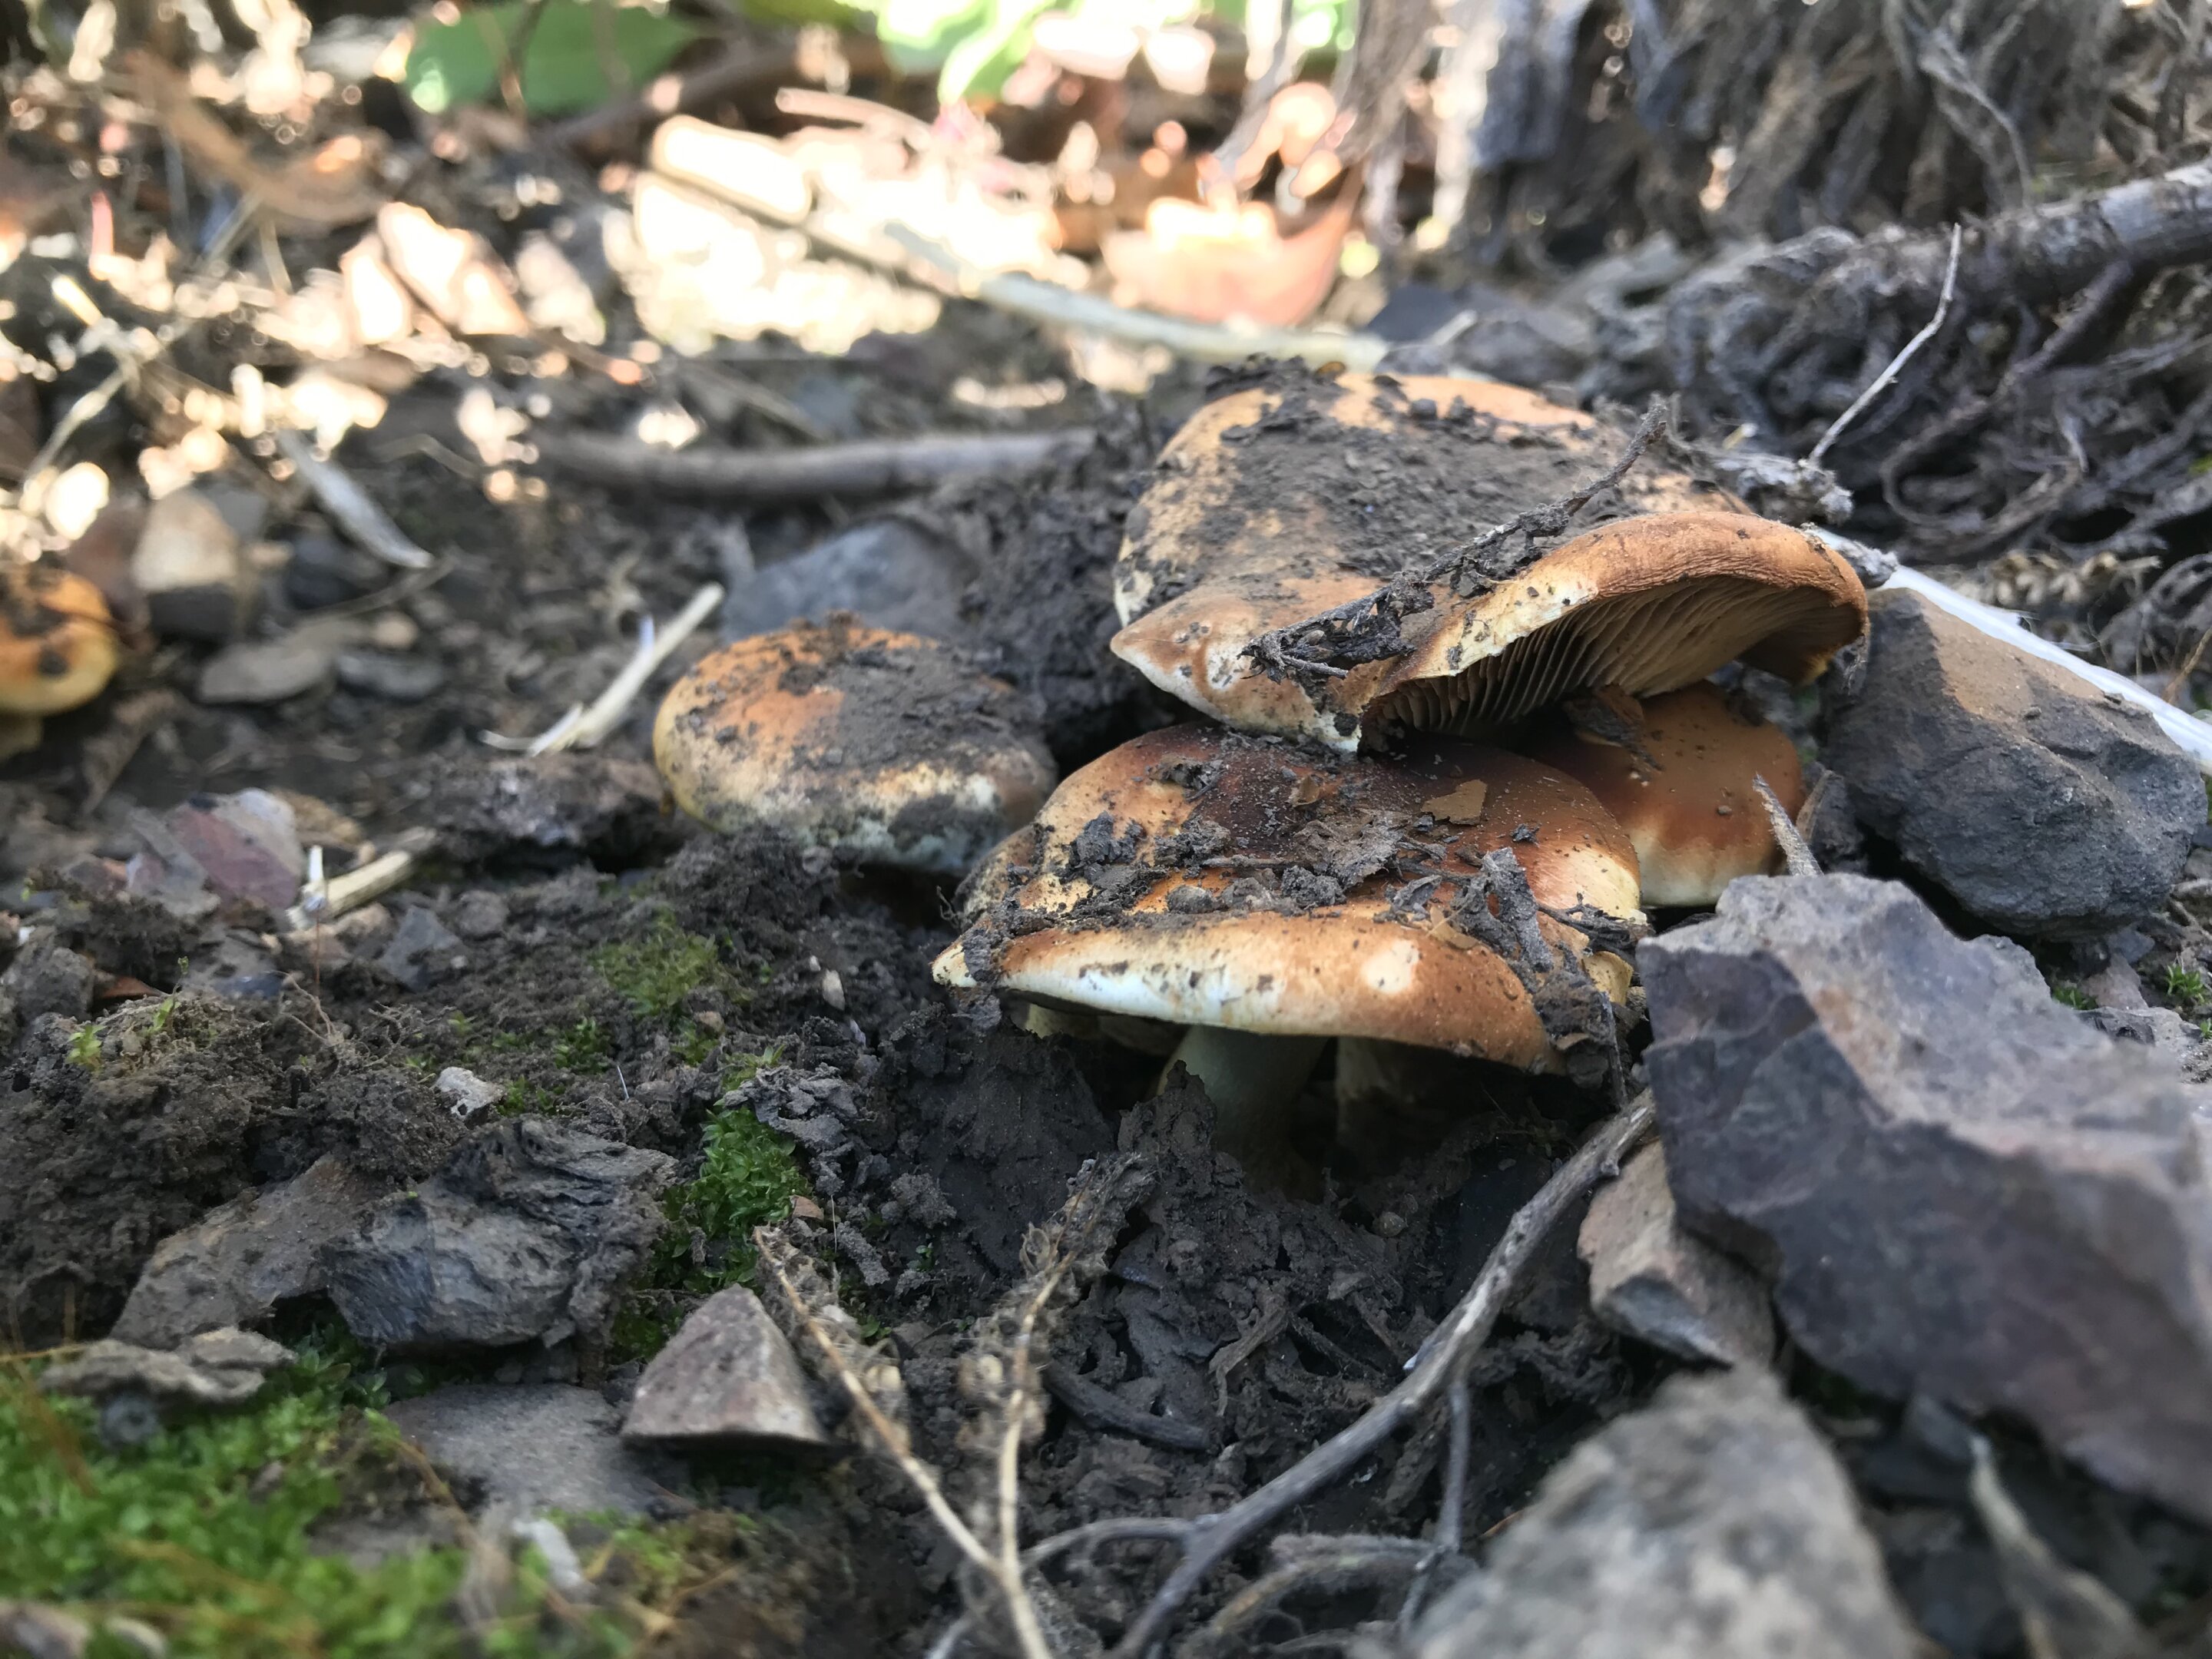 Fungi and bacteria are binging on burned soil